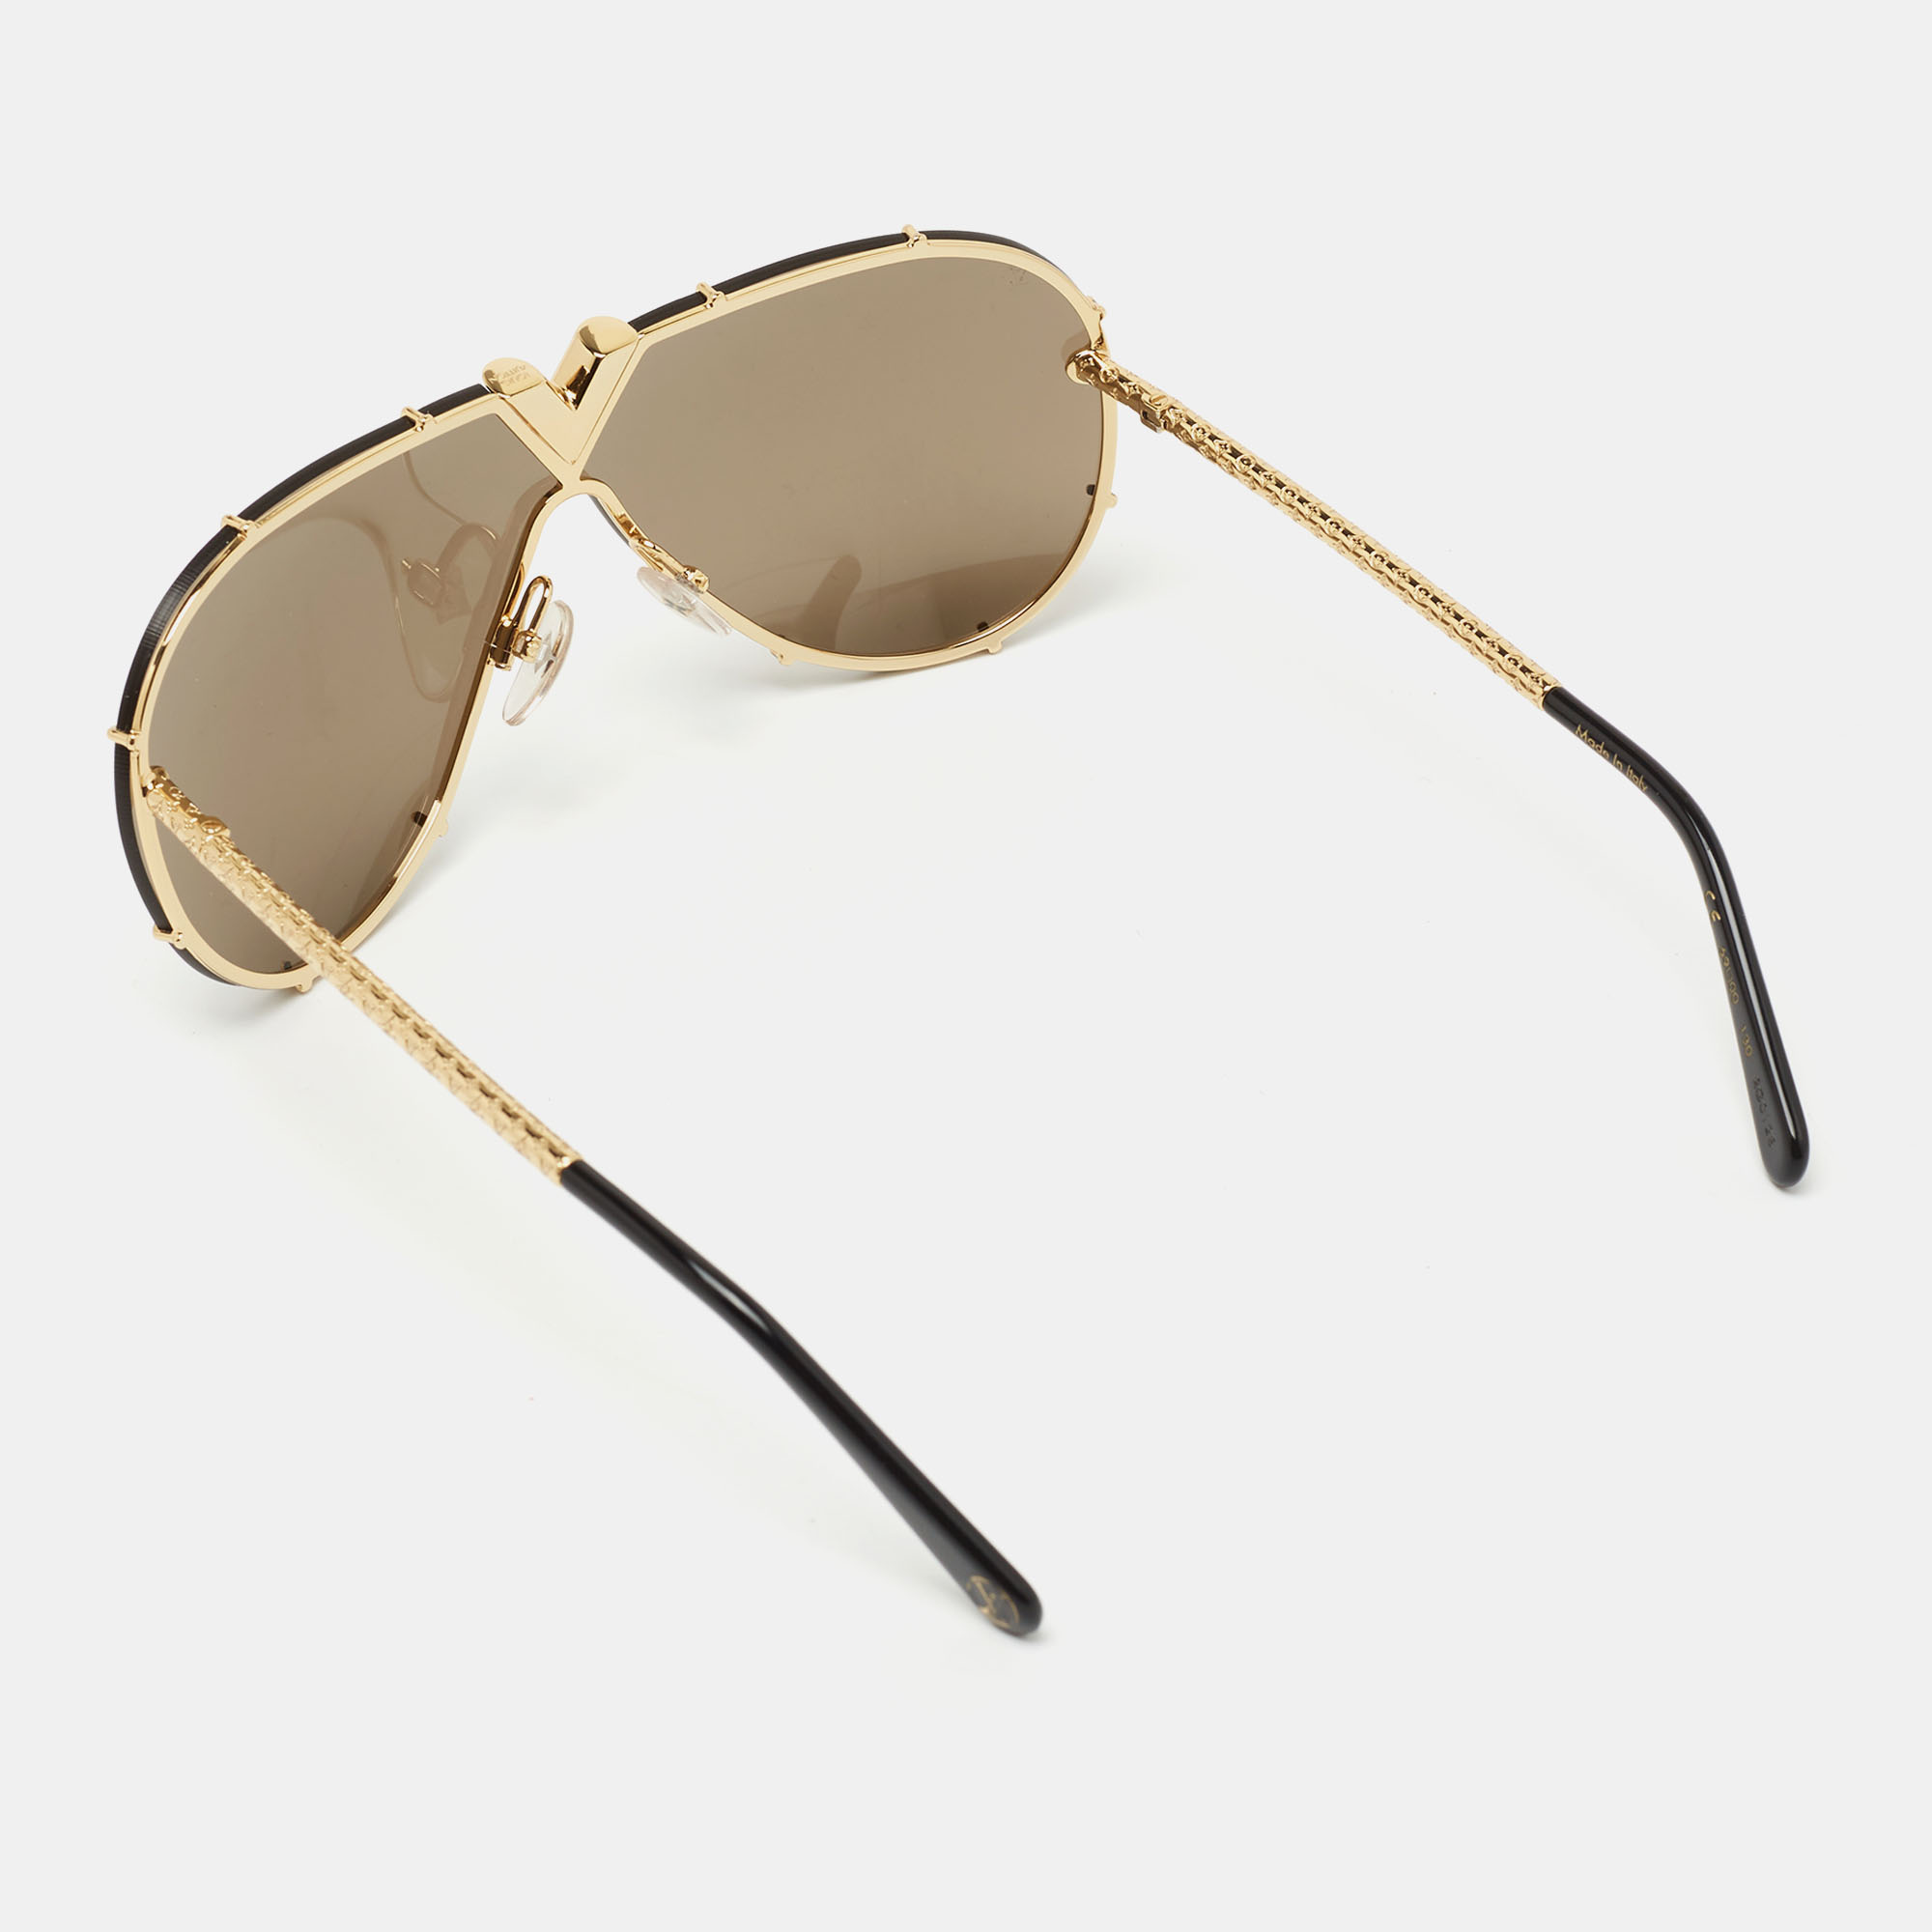 Compare prices for LV Drive Sunglasses (Z0897W) in official stores